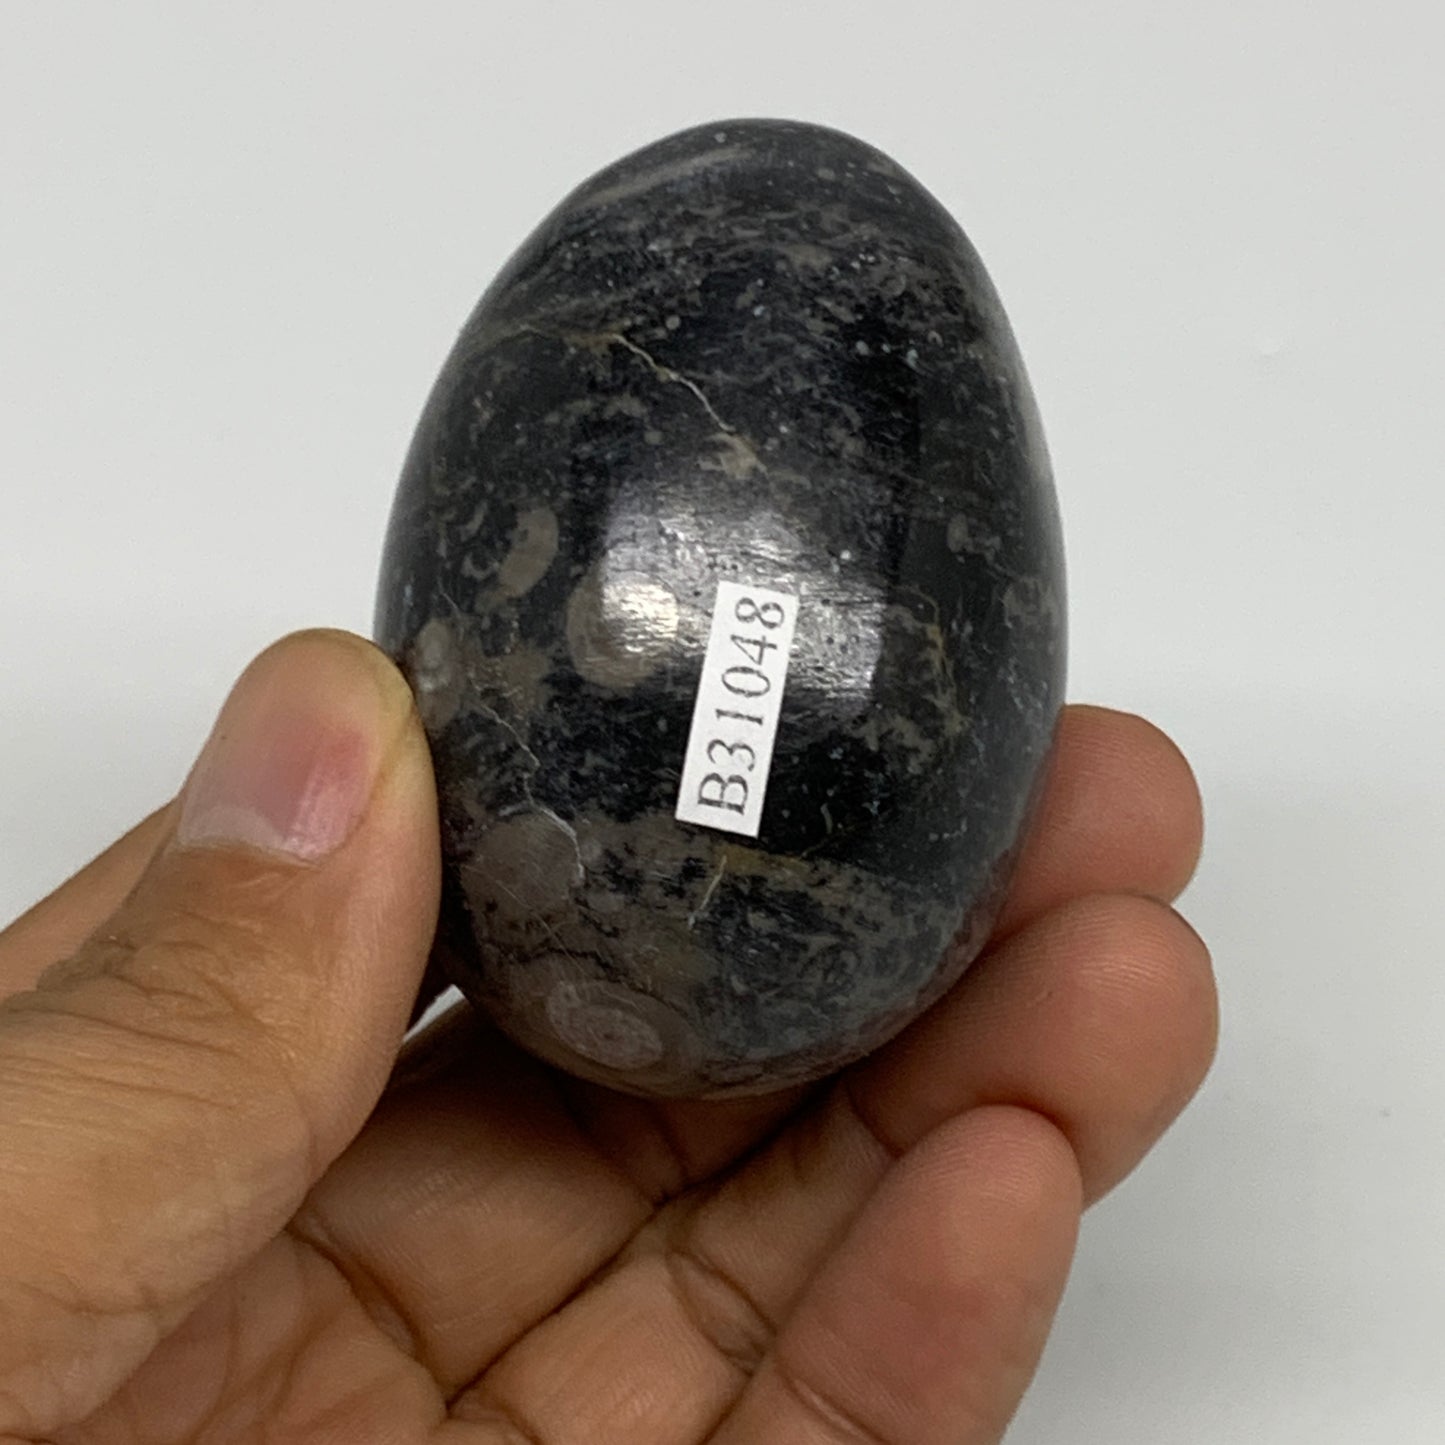 141.3g, 2.3"x1.6", Natural Fossil Orthoceras Stone Egg from Morocco, B31048